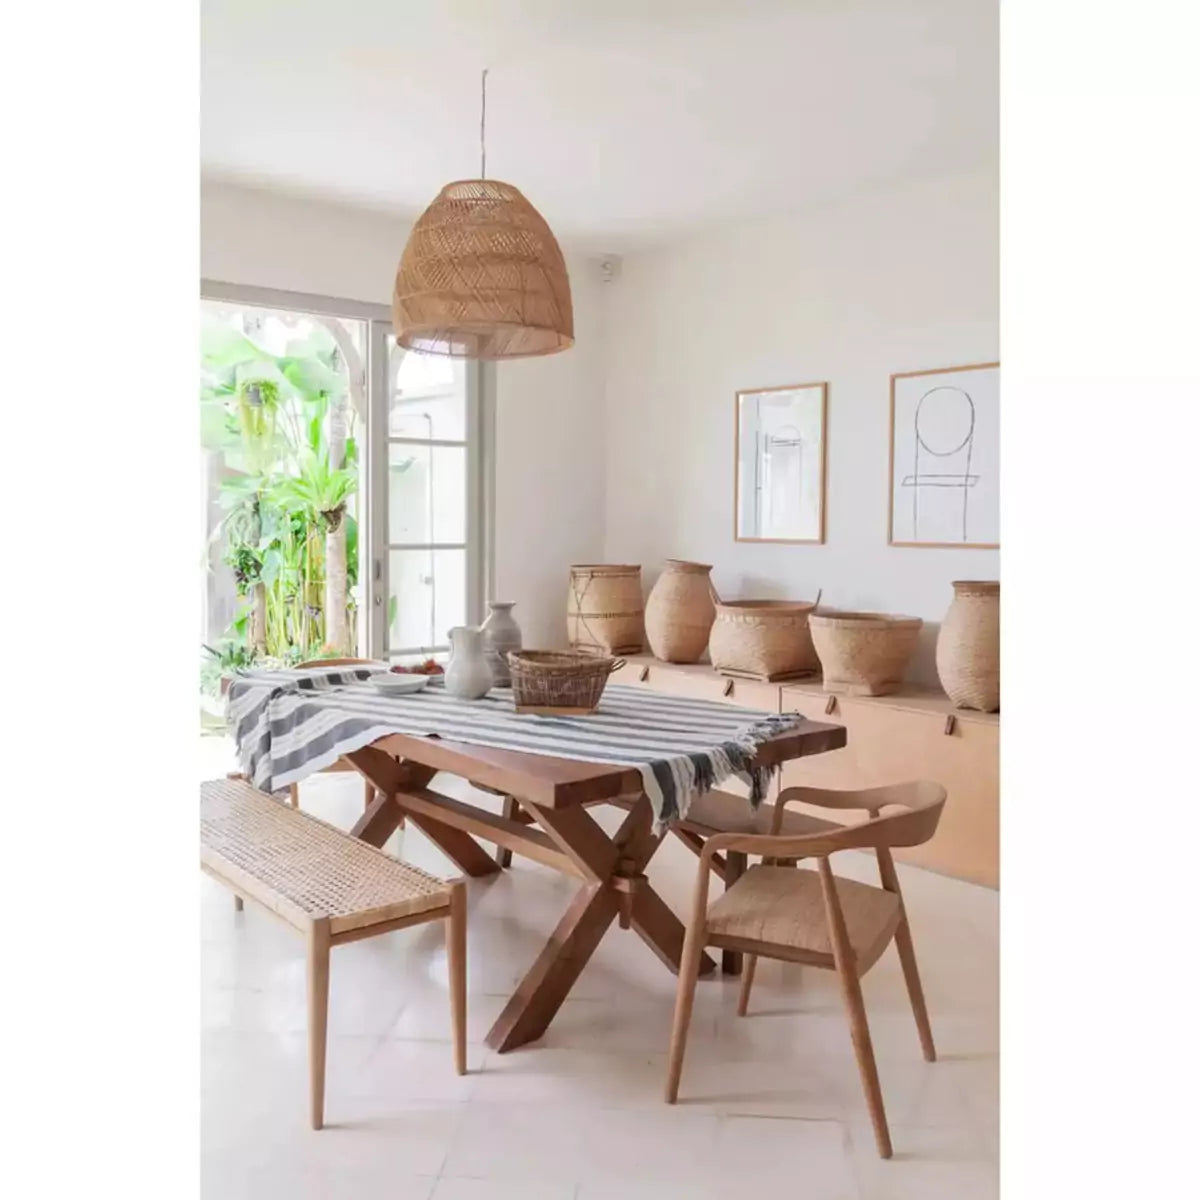 Bali Bungalow Agung Dining Table